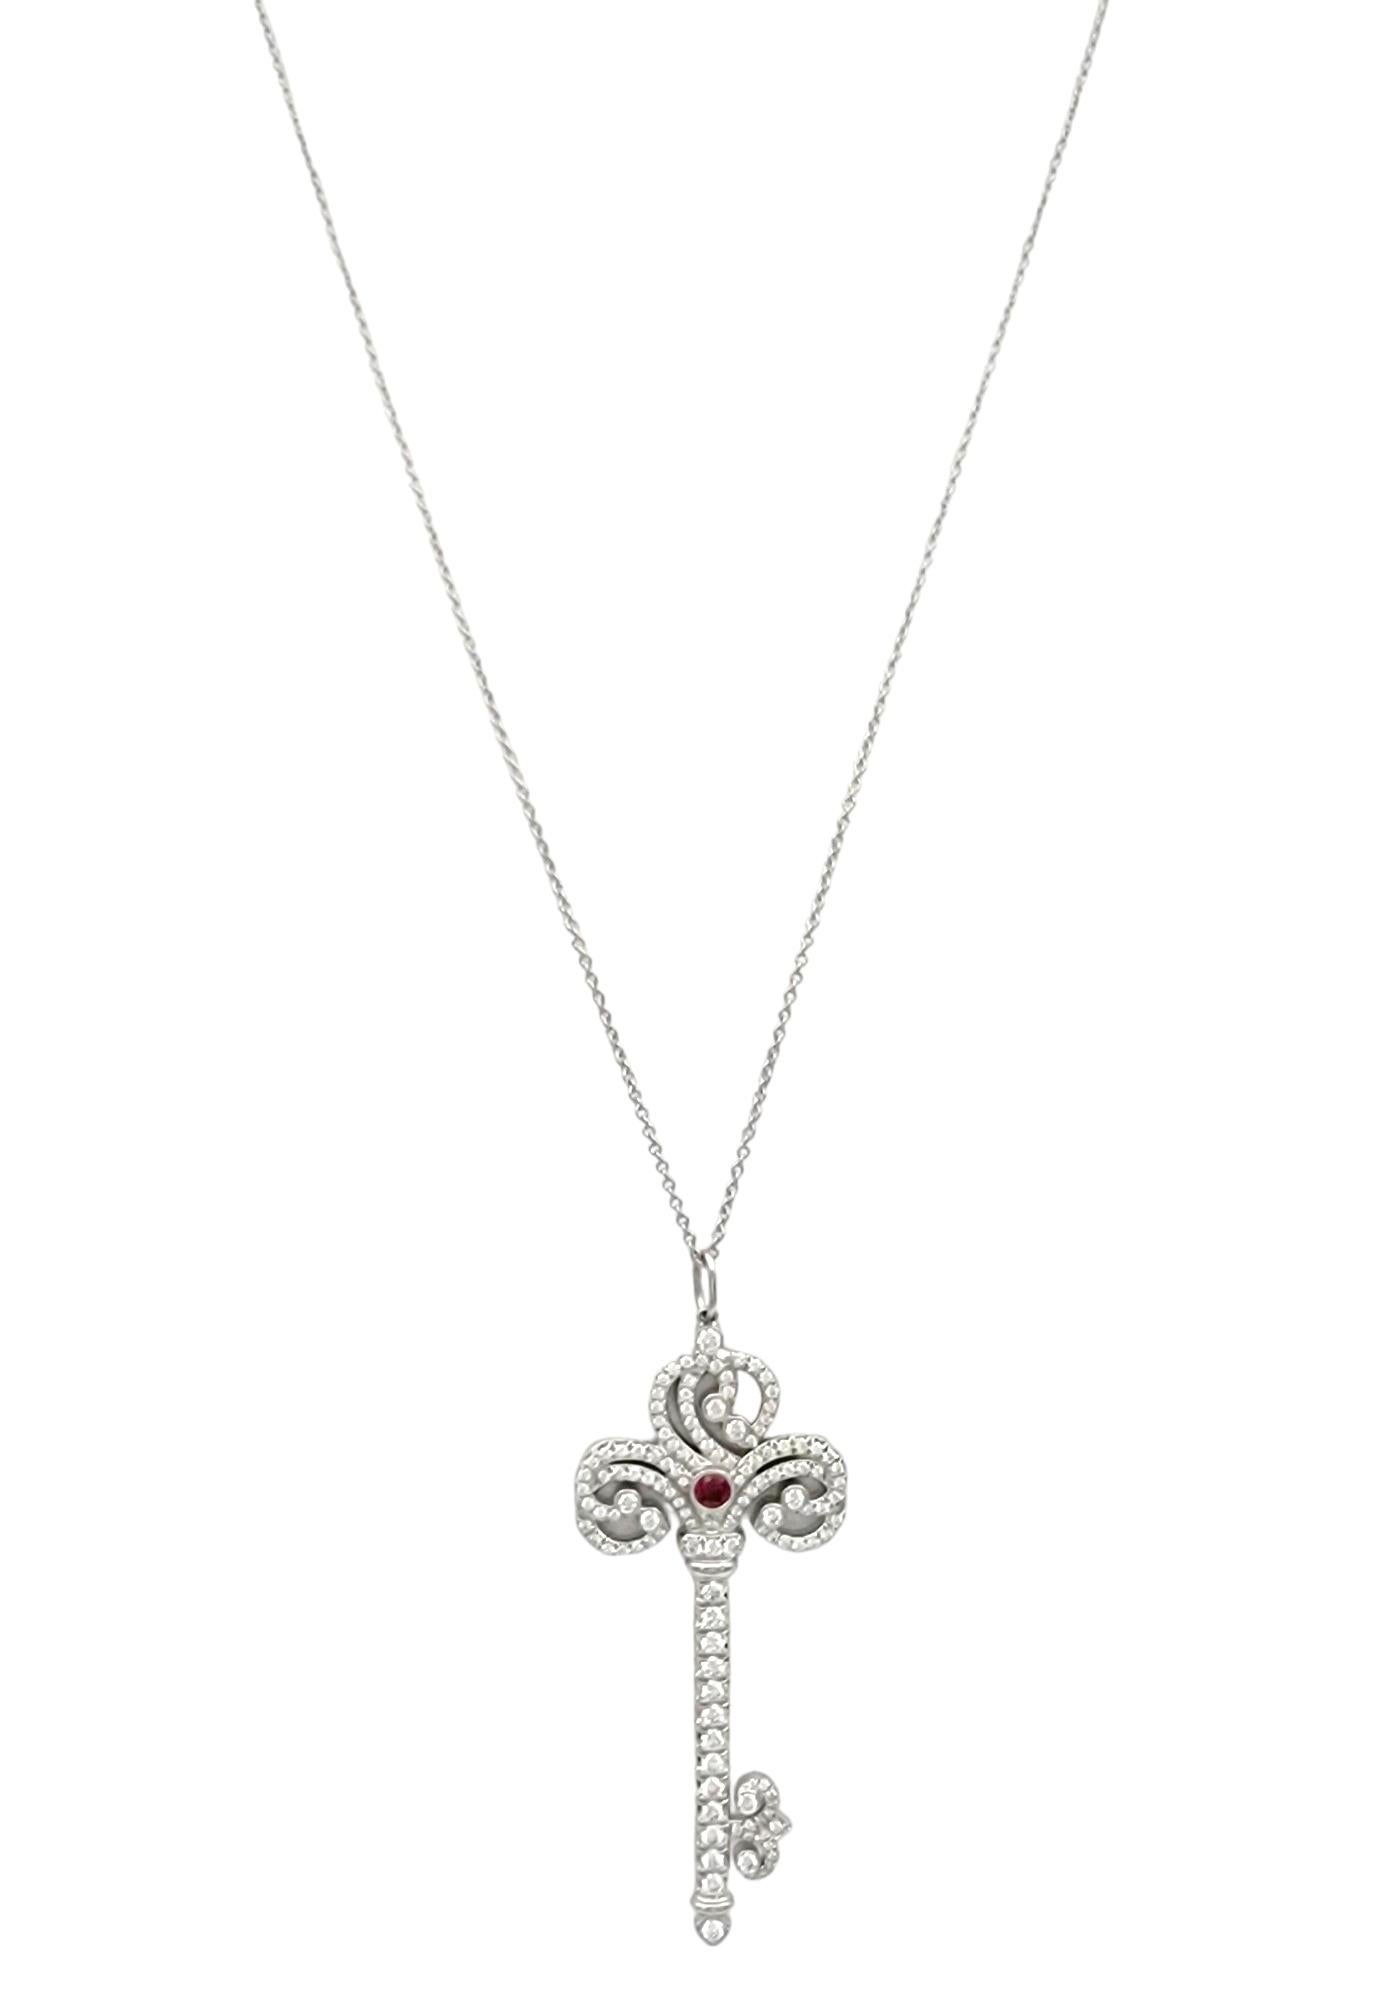 Tiffany & Co. Diamond and Ruby Large Key Pendant Necklace in Polished Platinum In Excellent Condition For Sale In Scottsdale, AZ